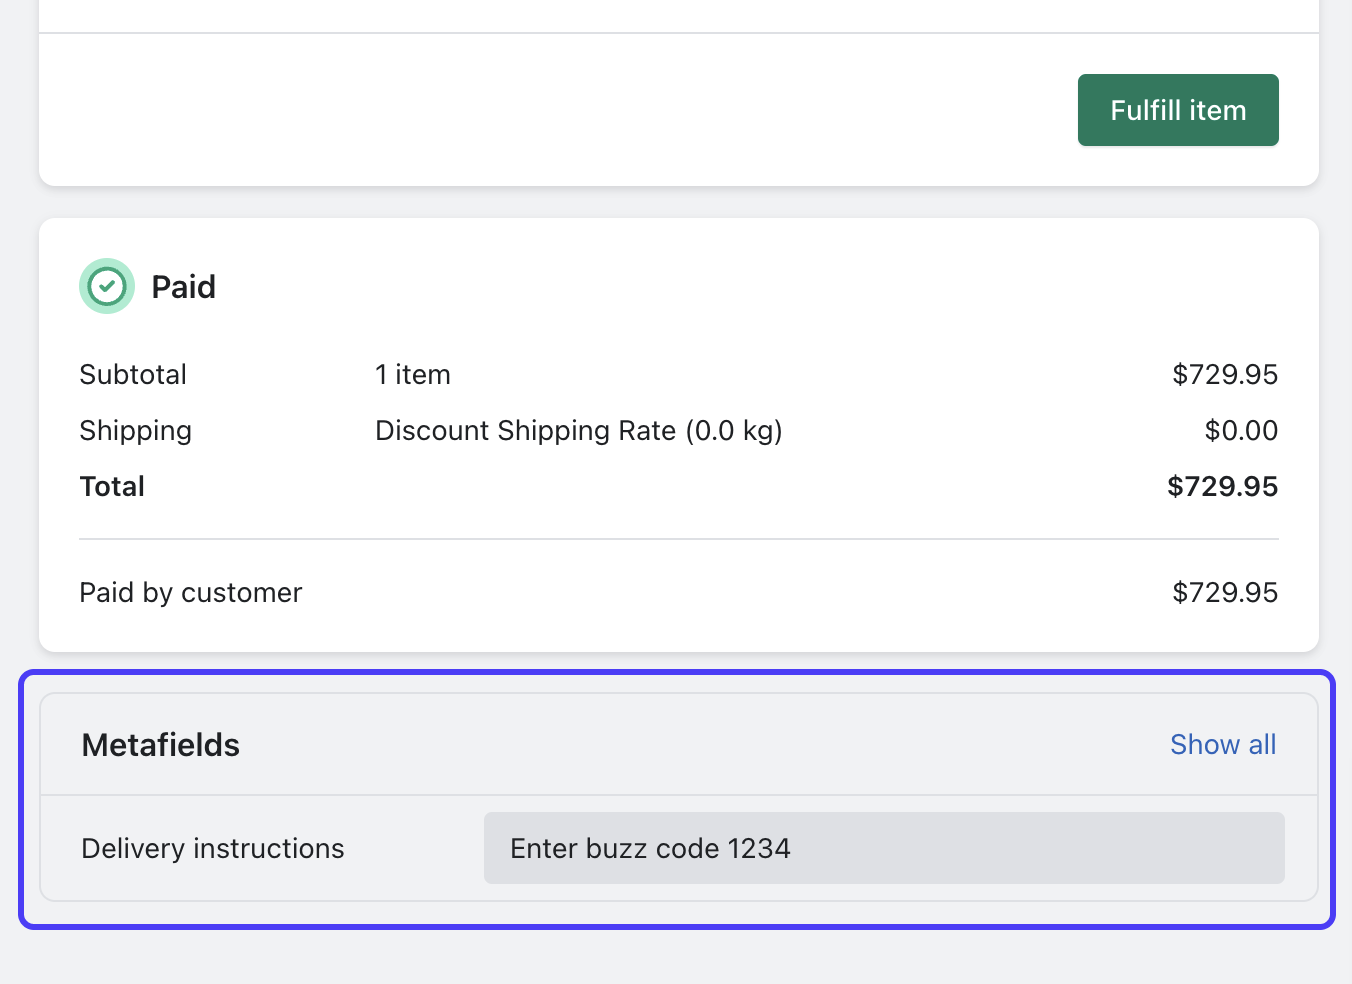 The metafield in the Shopify admin. The UI says 'UI extension order note', and includes the note that the customer added to provide delivery instructions. The note says 'Enter buzz code 1234'